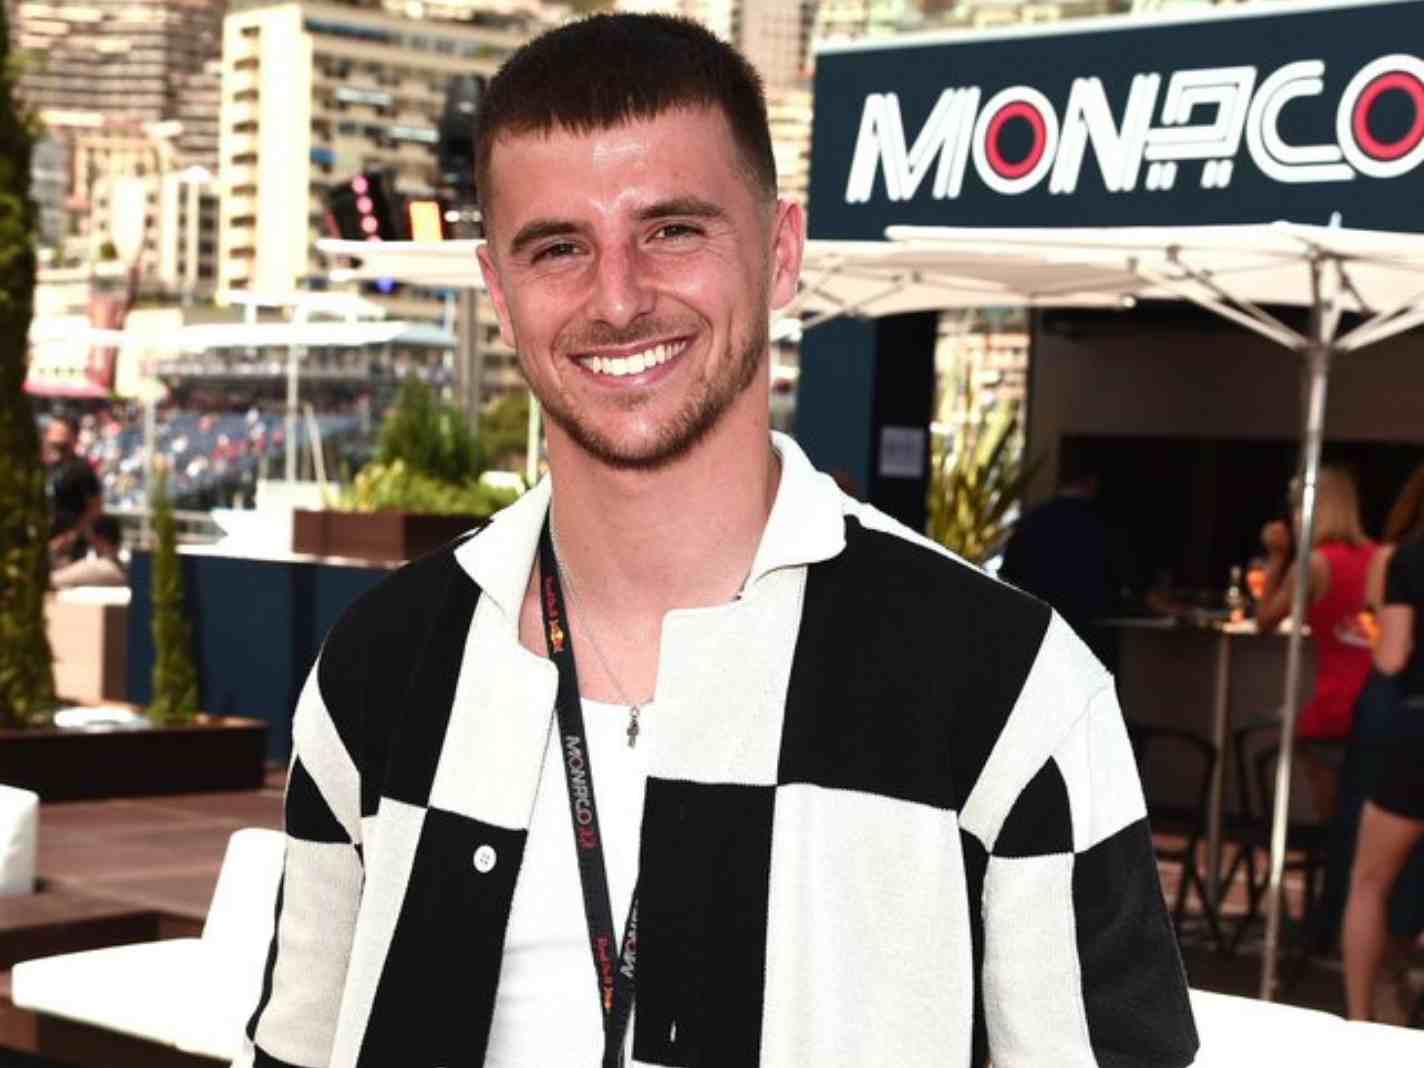 Loved the breezy Rhude shirt Mason Mount wore at Monaco GP? Here’s what it costs